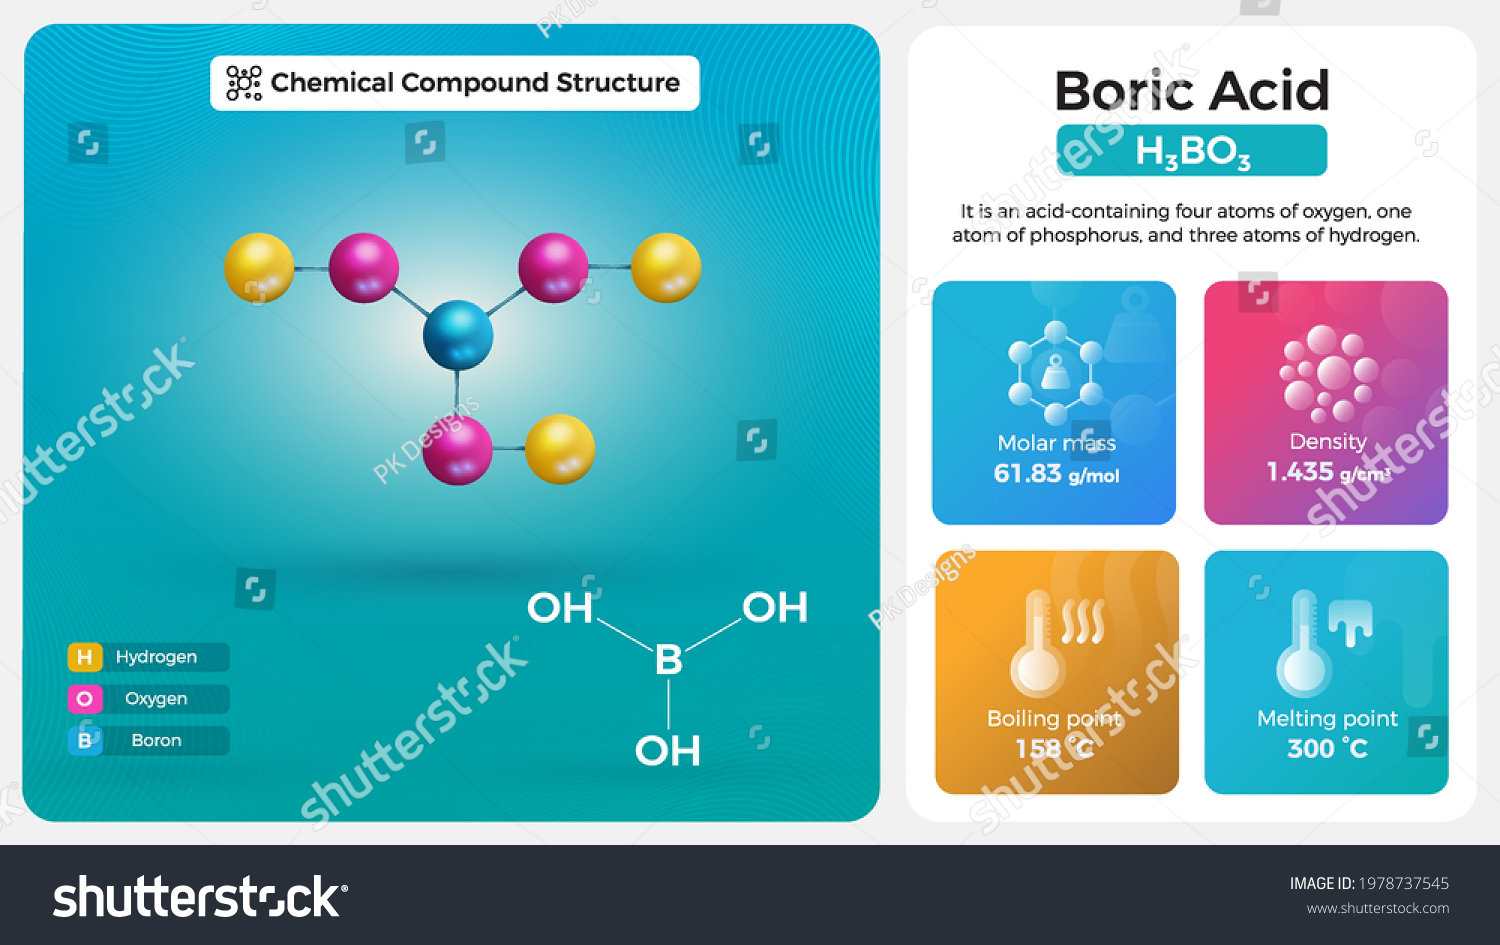 Boric Acid Properties Chemical Compound Structure Stock Vector (Royalty ...